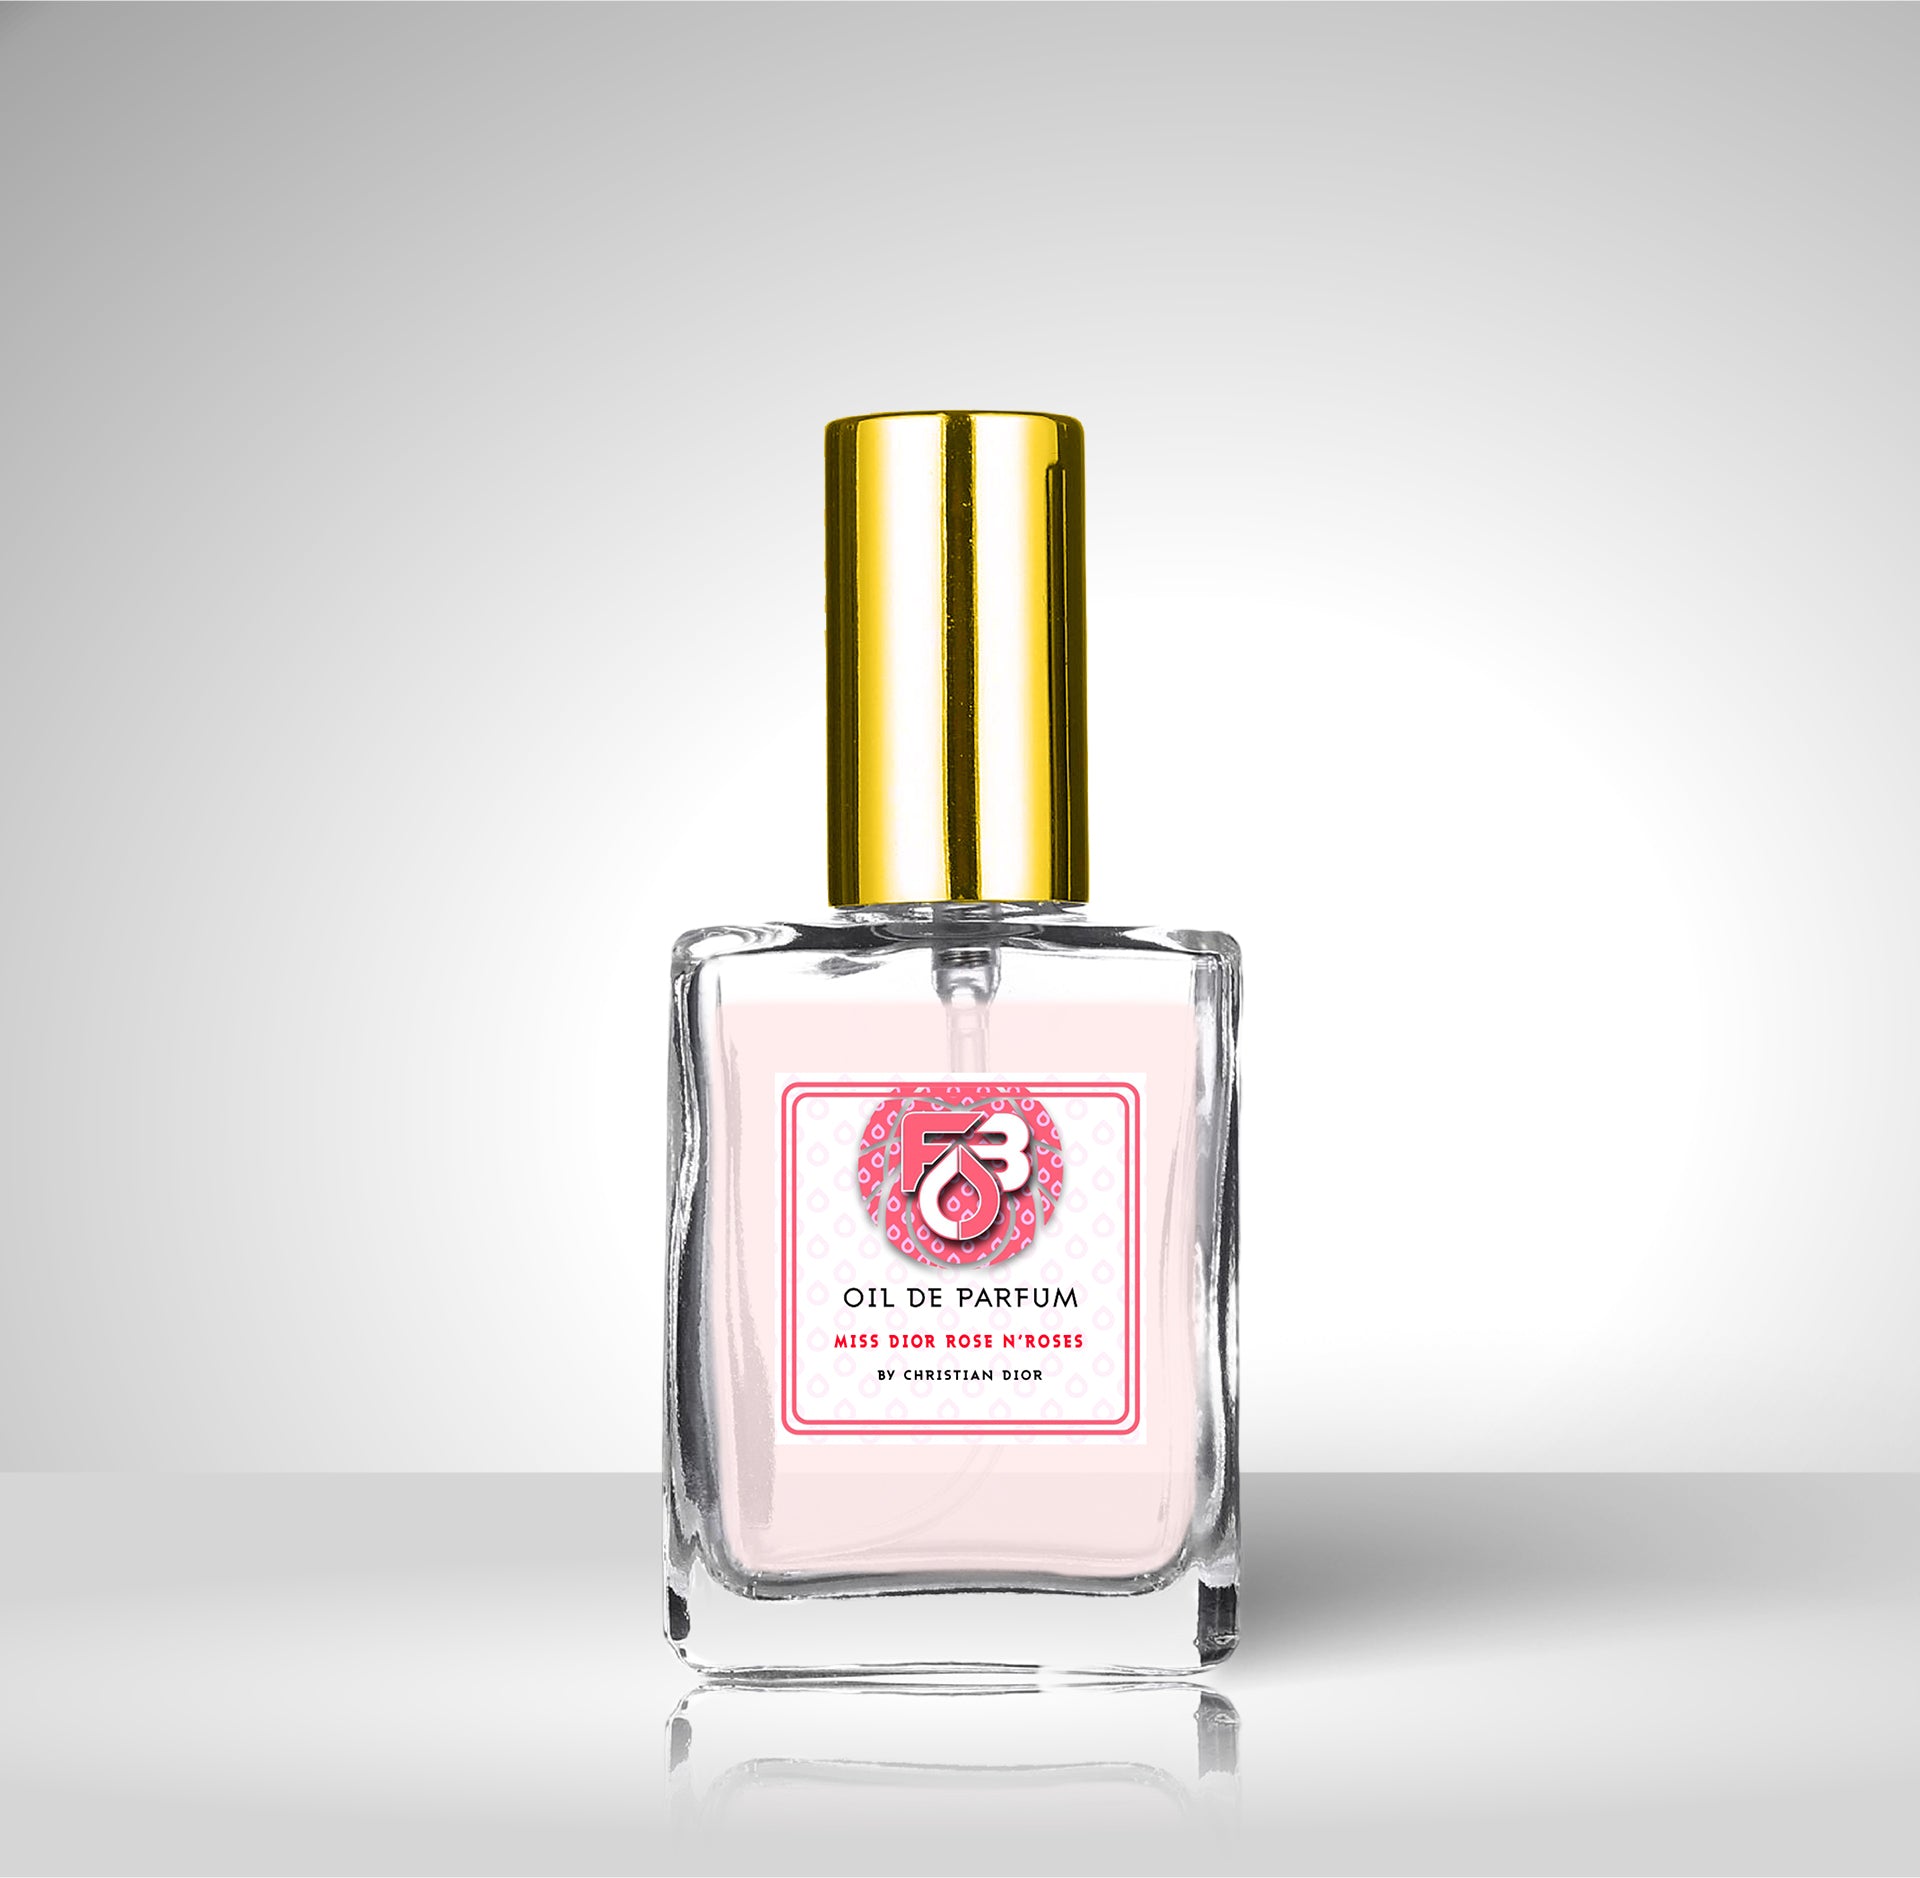 Compare Aroma To Miss Dior Rose N'Roses-22